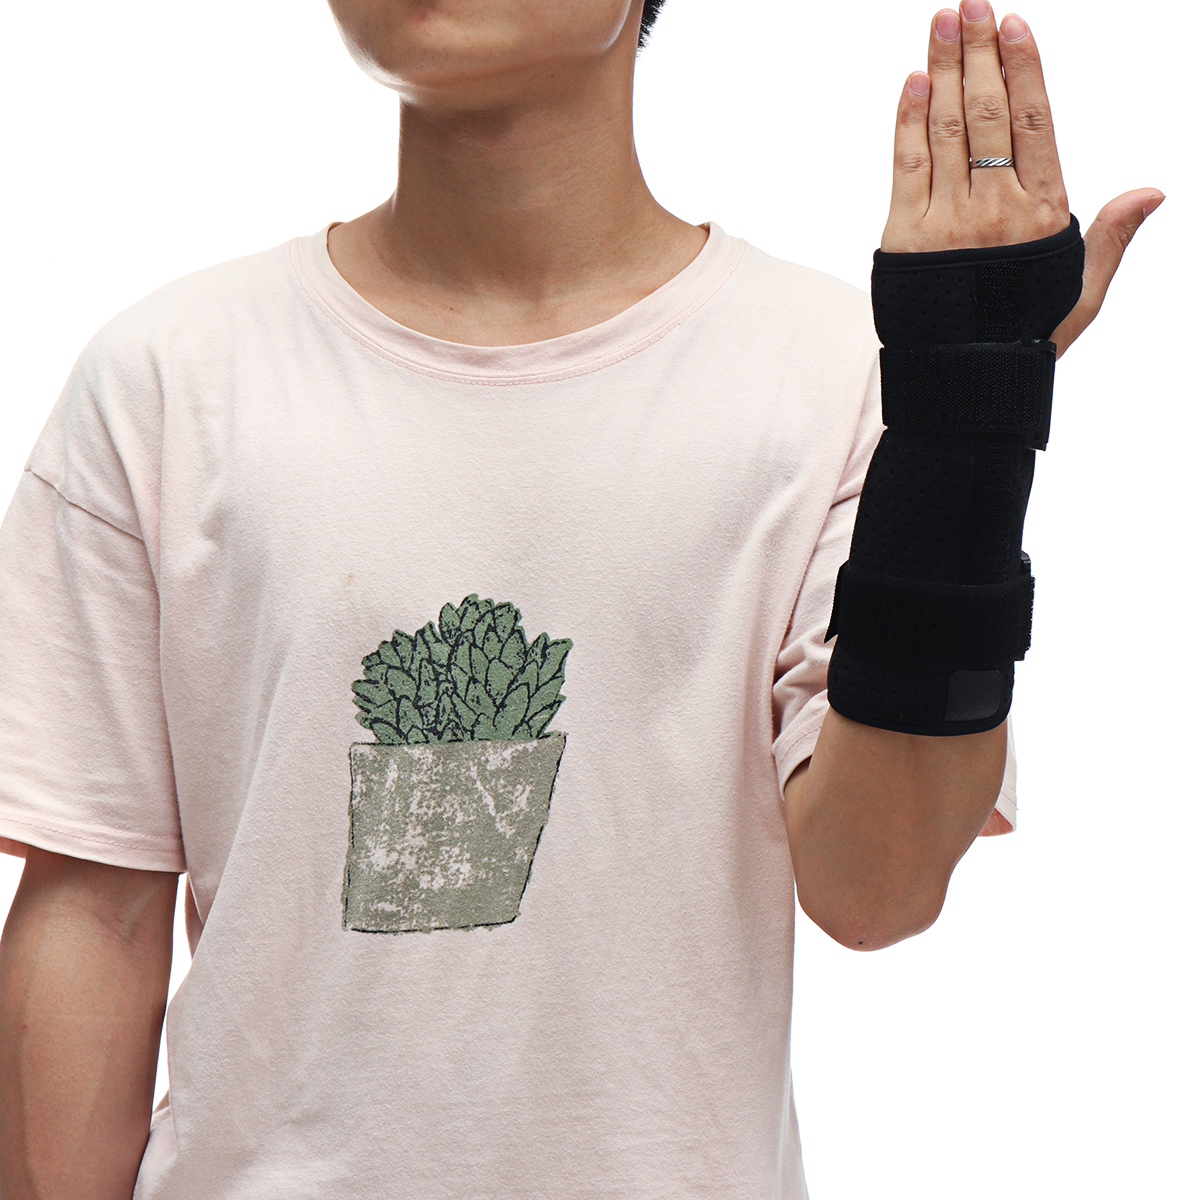 Breathable-Adjustable-Wrist-Support-Wrist-Brace-Wrist-Joint-Fixation-Sprain-Protector-Medical-Protec-1571406-8